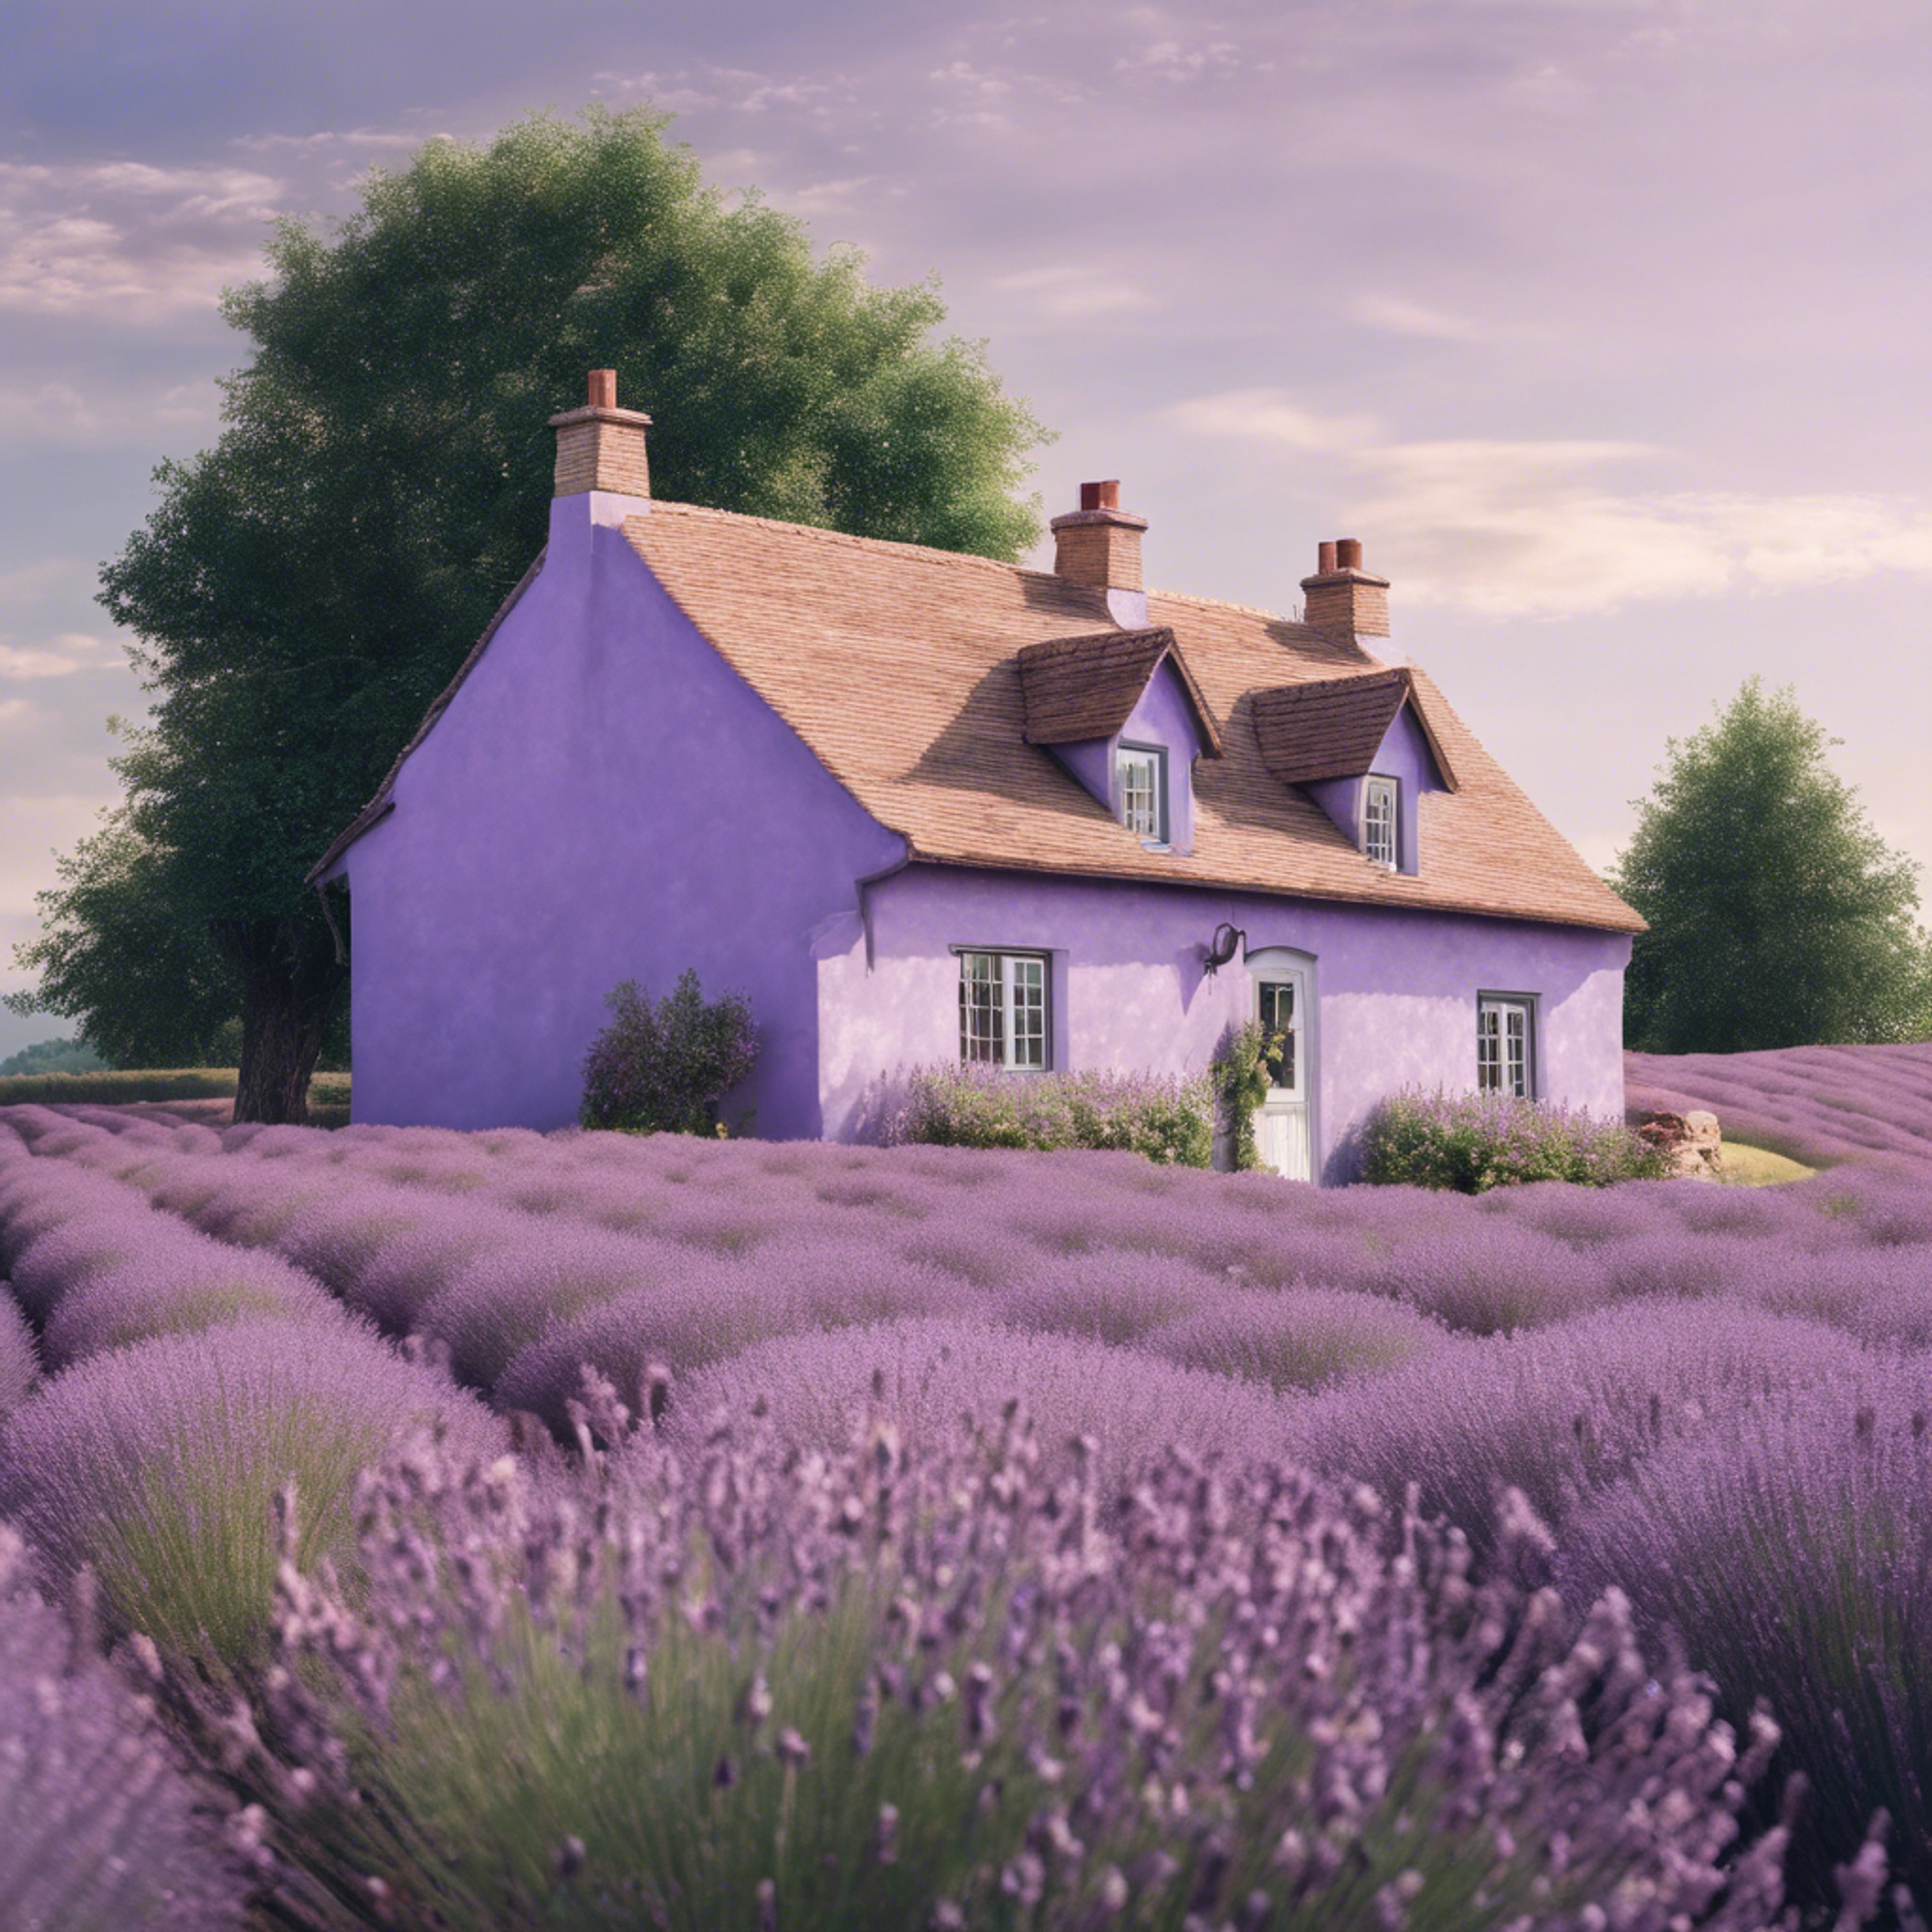 A quaint pastel purple cottage in the countryside surrounded by lavender fields. Обои[9ff1532238764d01813b]